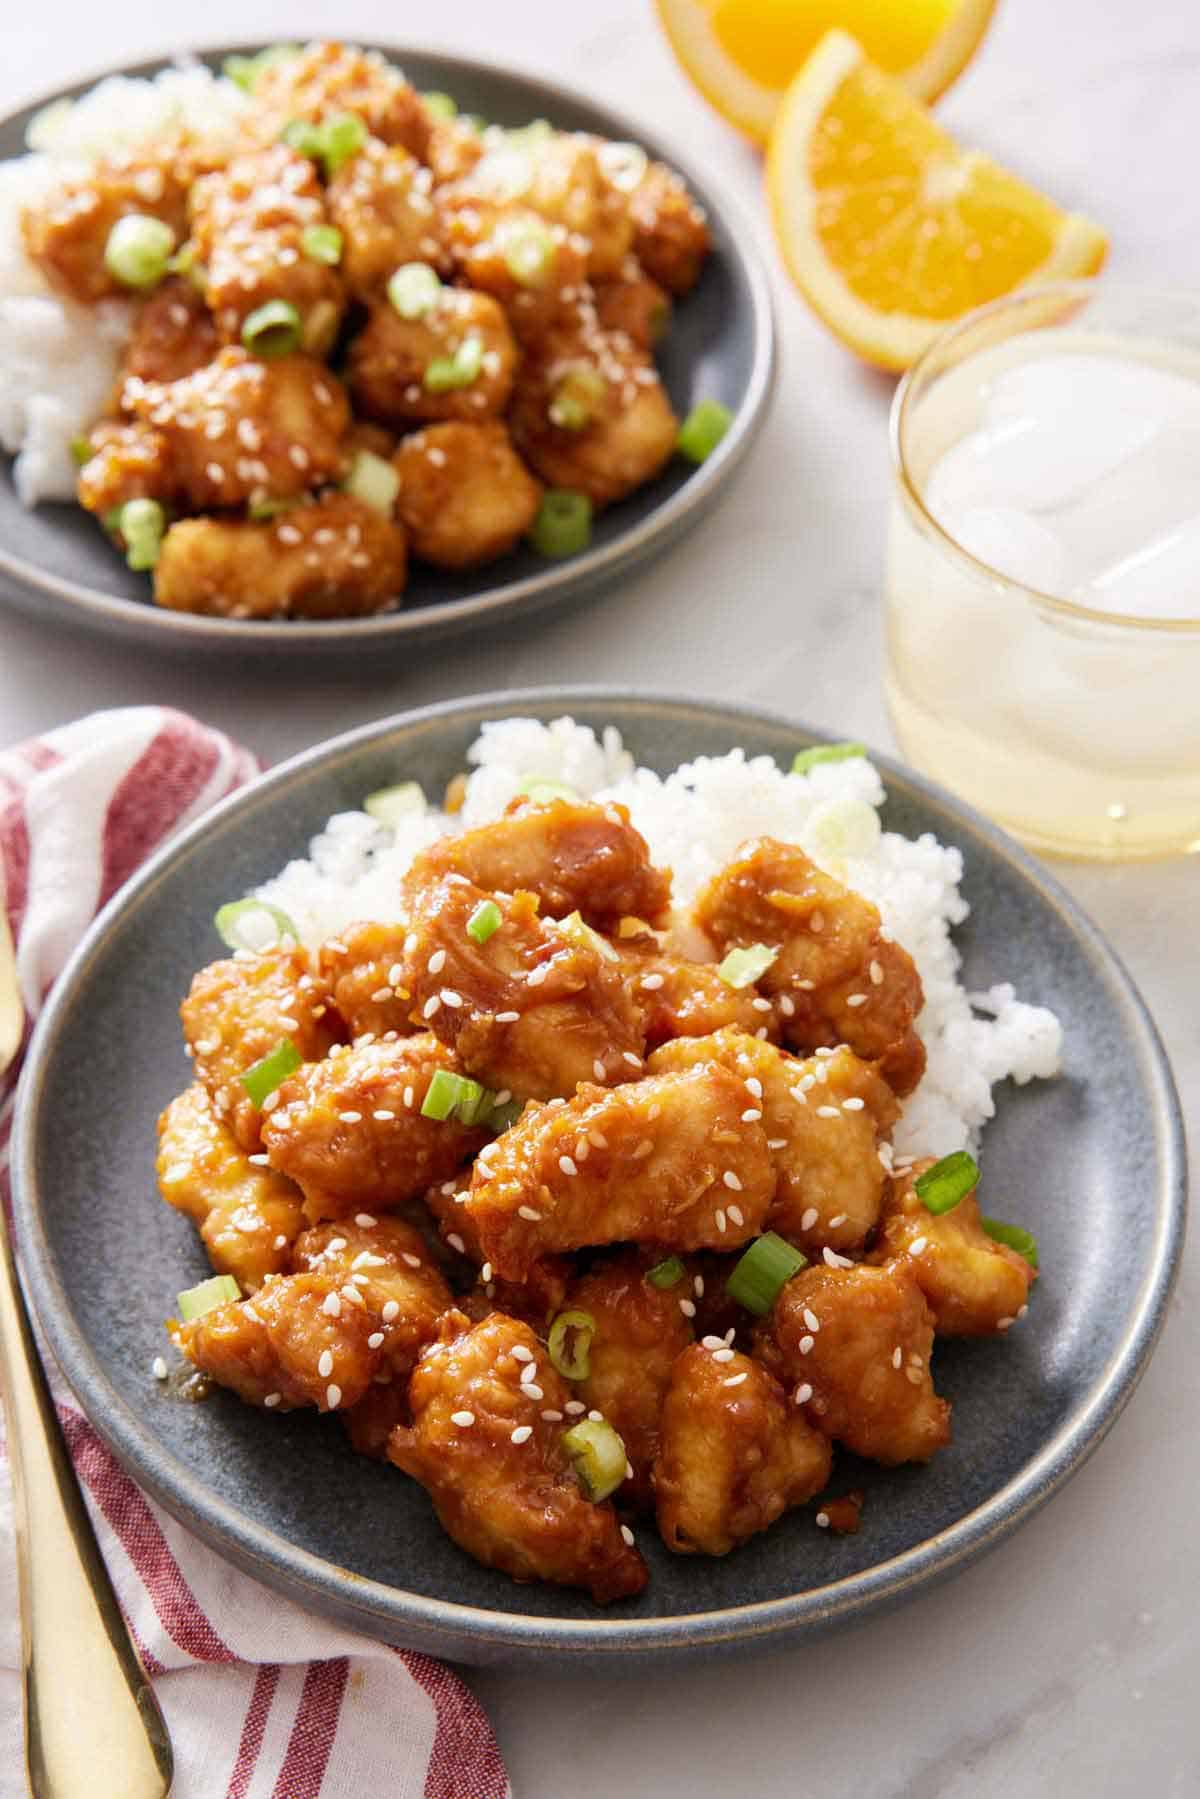 A plate of rice and air fryer orange chicken garnished with sesame seeds and green onions. Another plate in the back along with a drink and orange wedges.